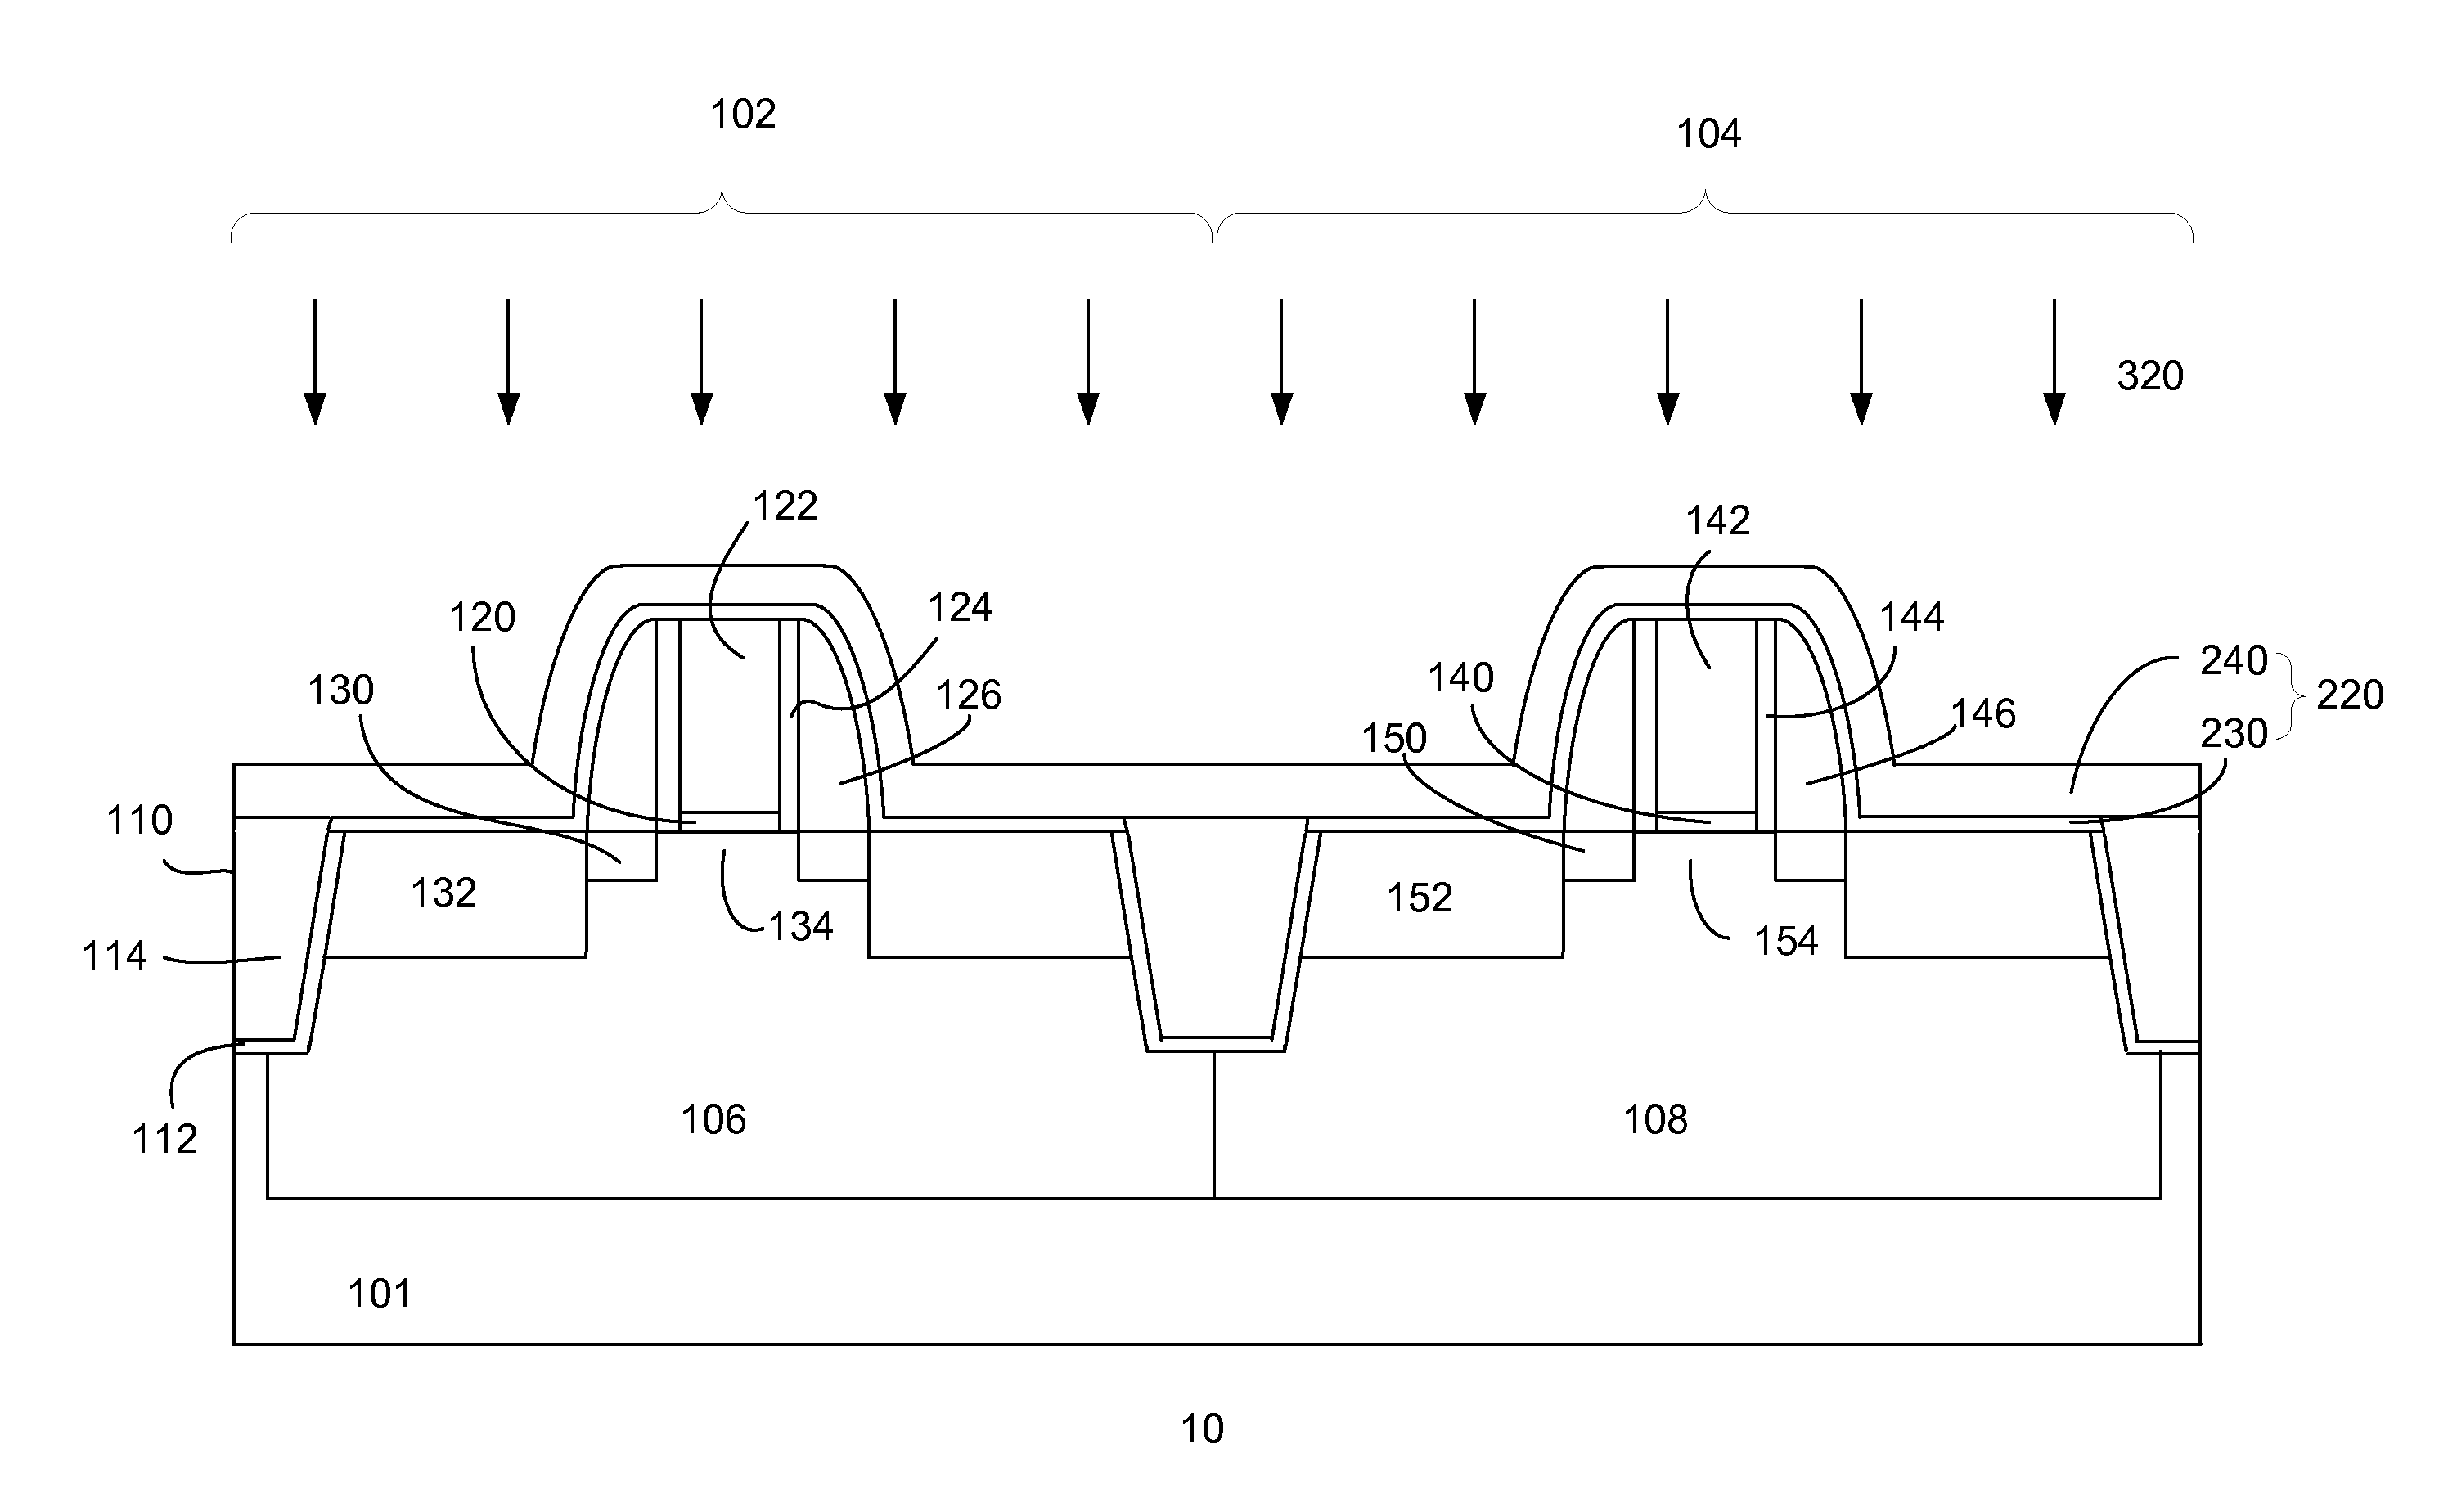 Method for fabricating semiconductor devices using stress engineering